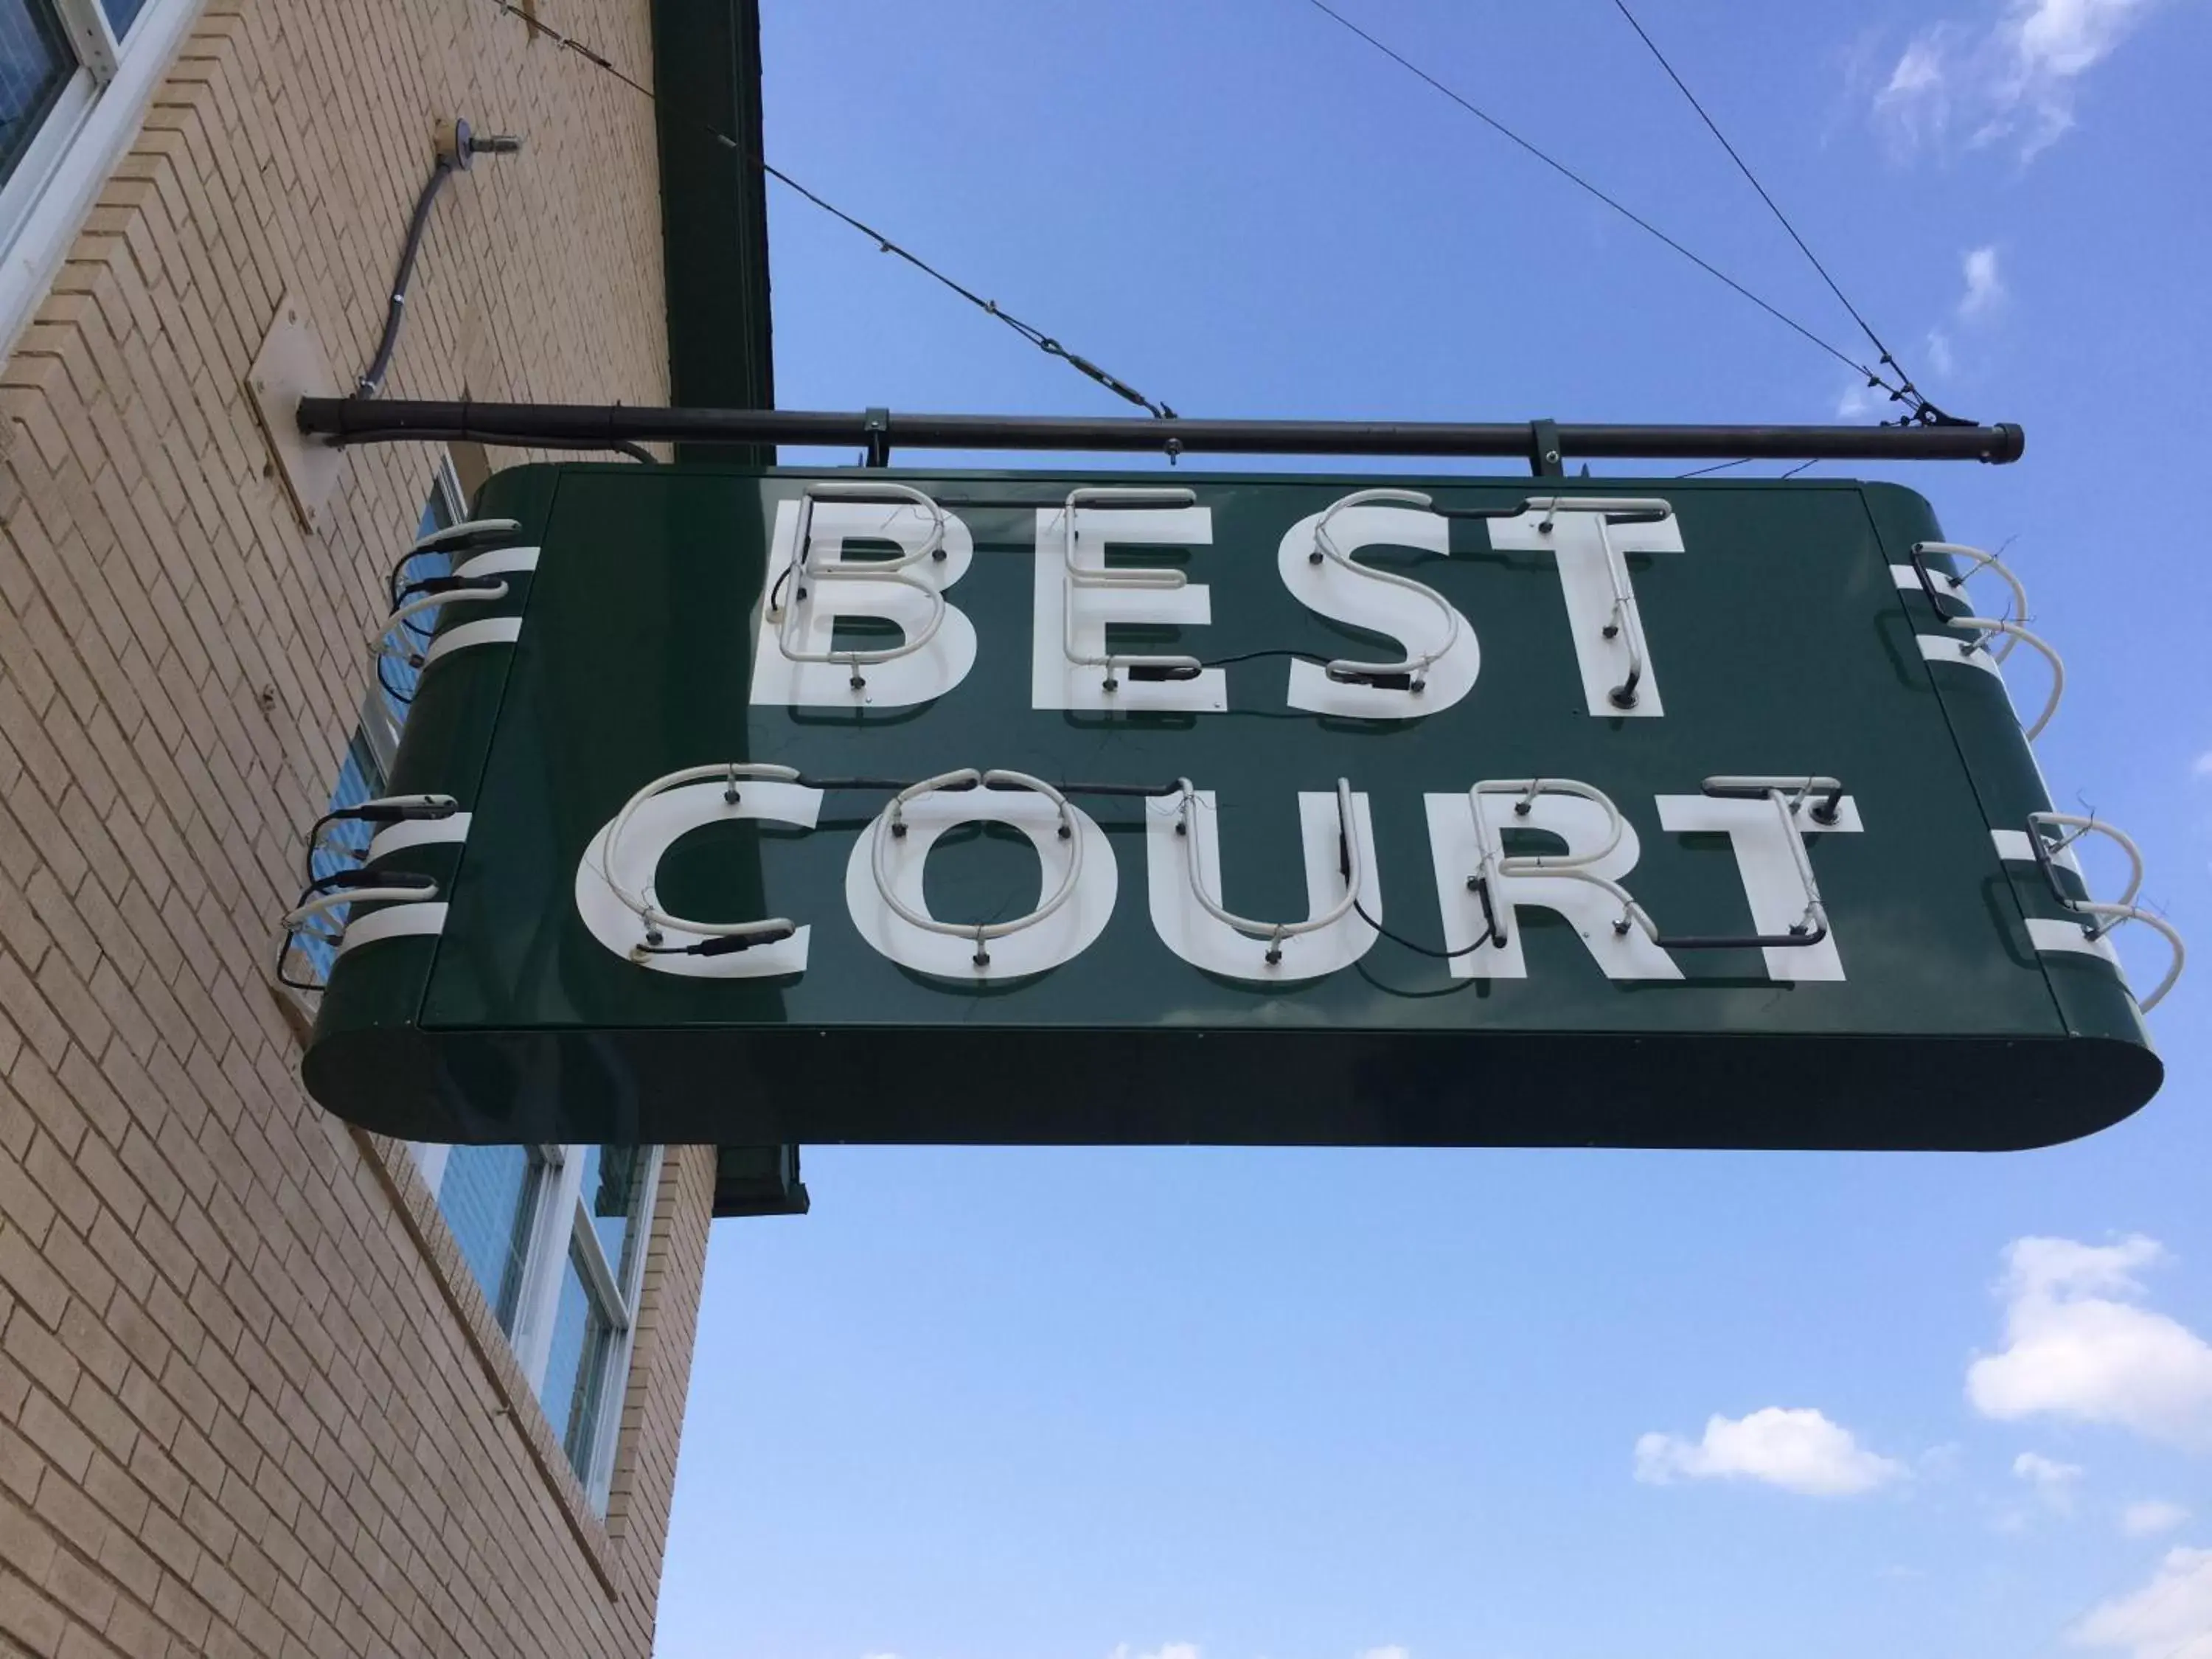 Property logo or sign in Best Court